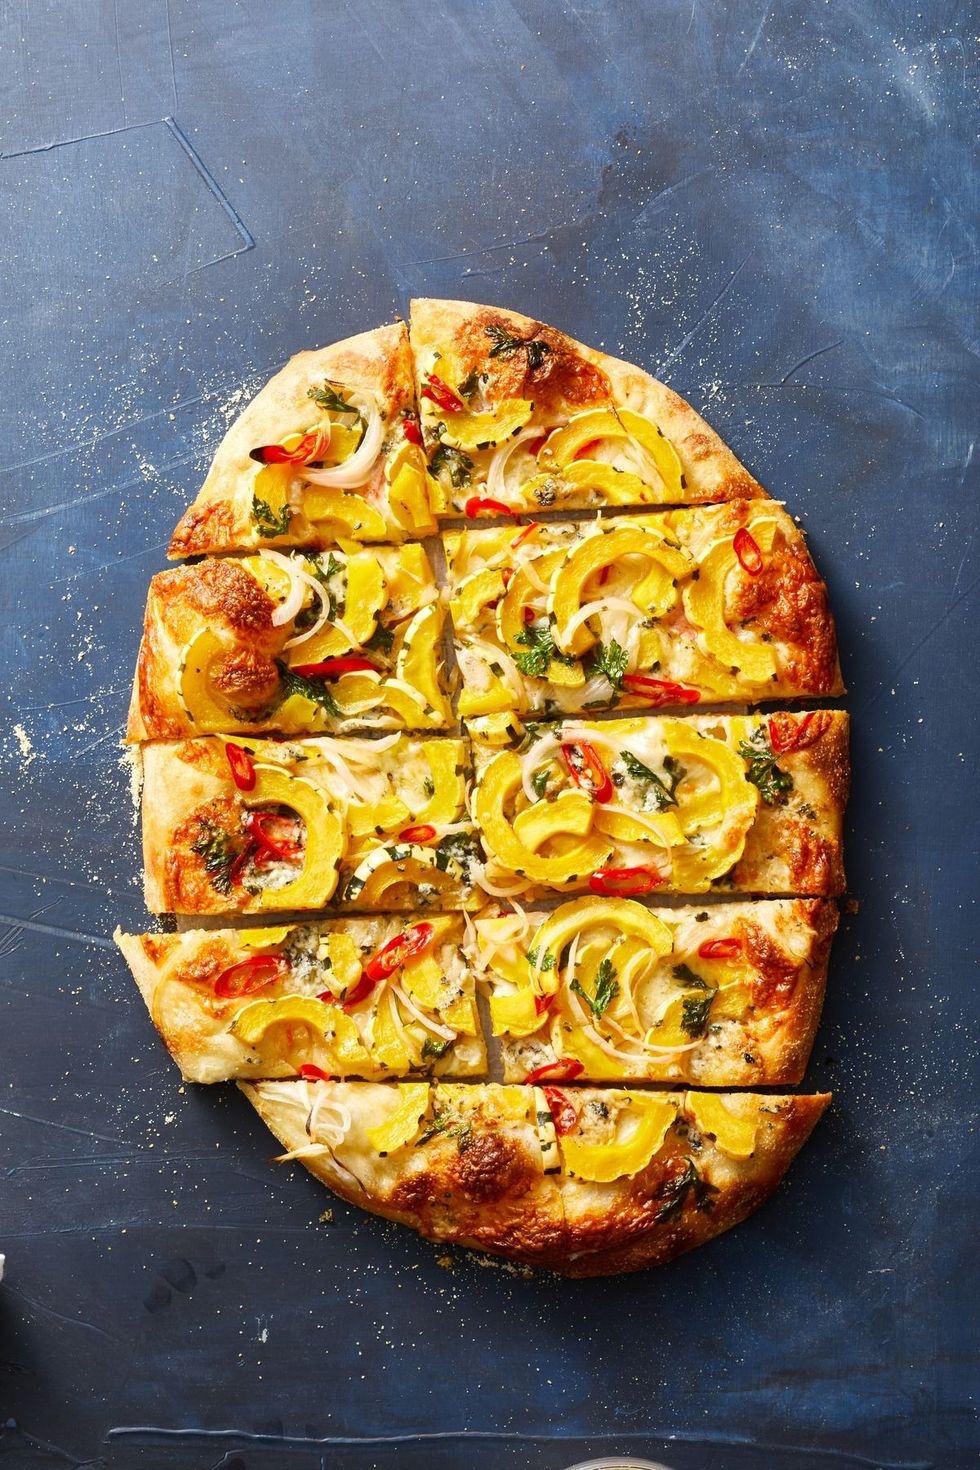 https://hips.hearstapps.com/hmg-prod/images/delicata-pizza-christmas-appetizer-1667922217.jpeg?crop=1xw:1xh;center,top&resize=980:*